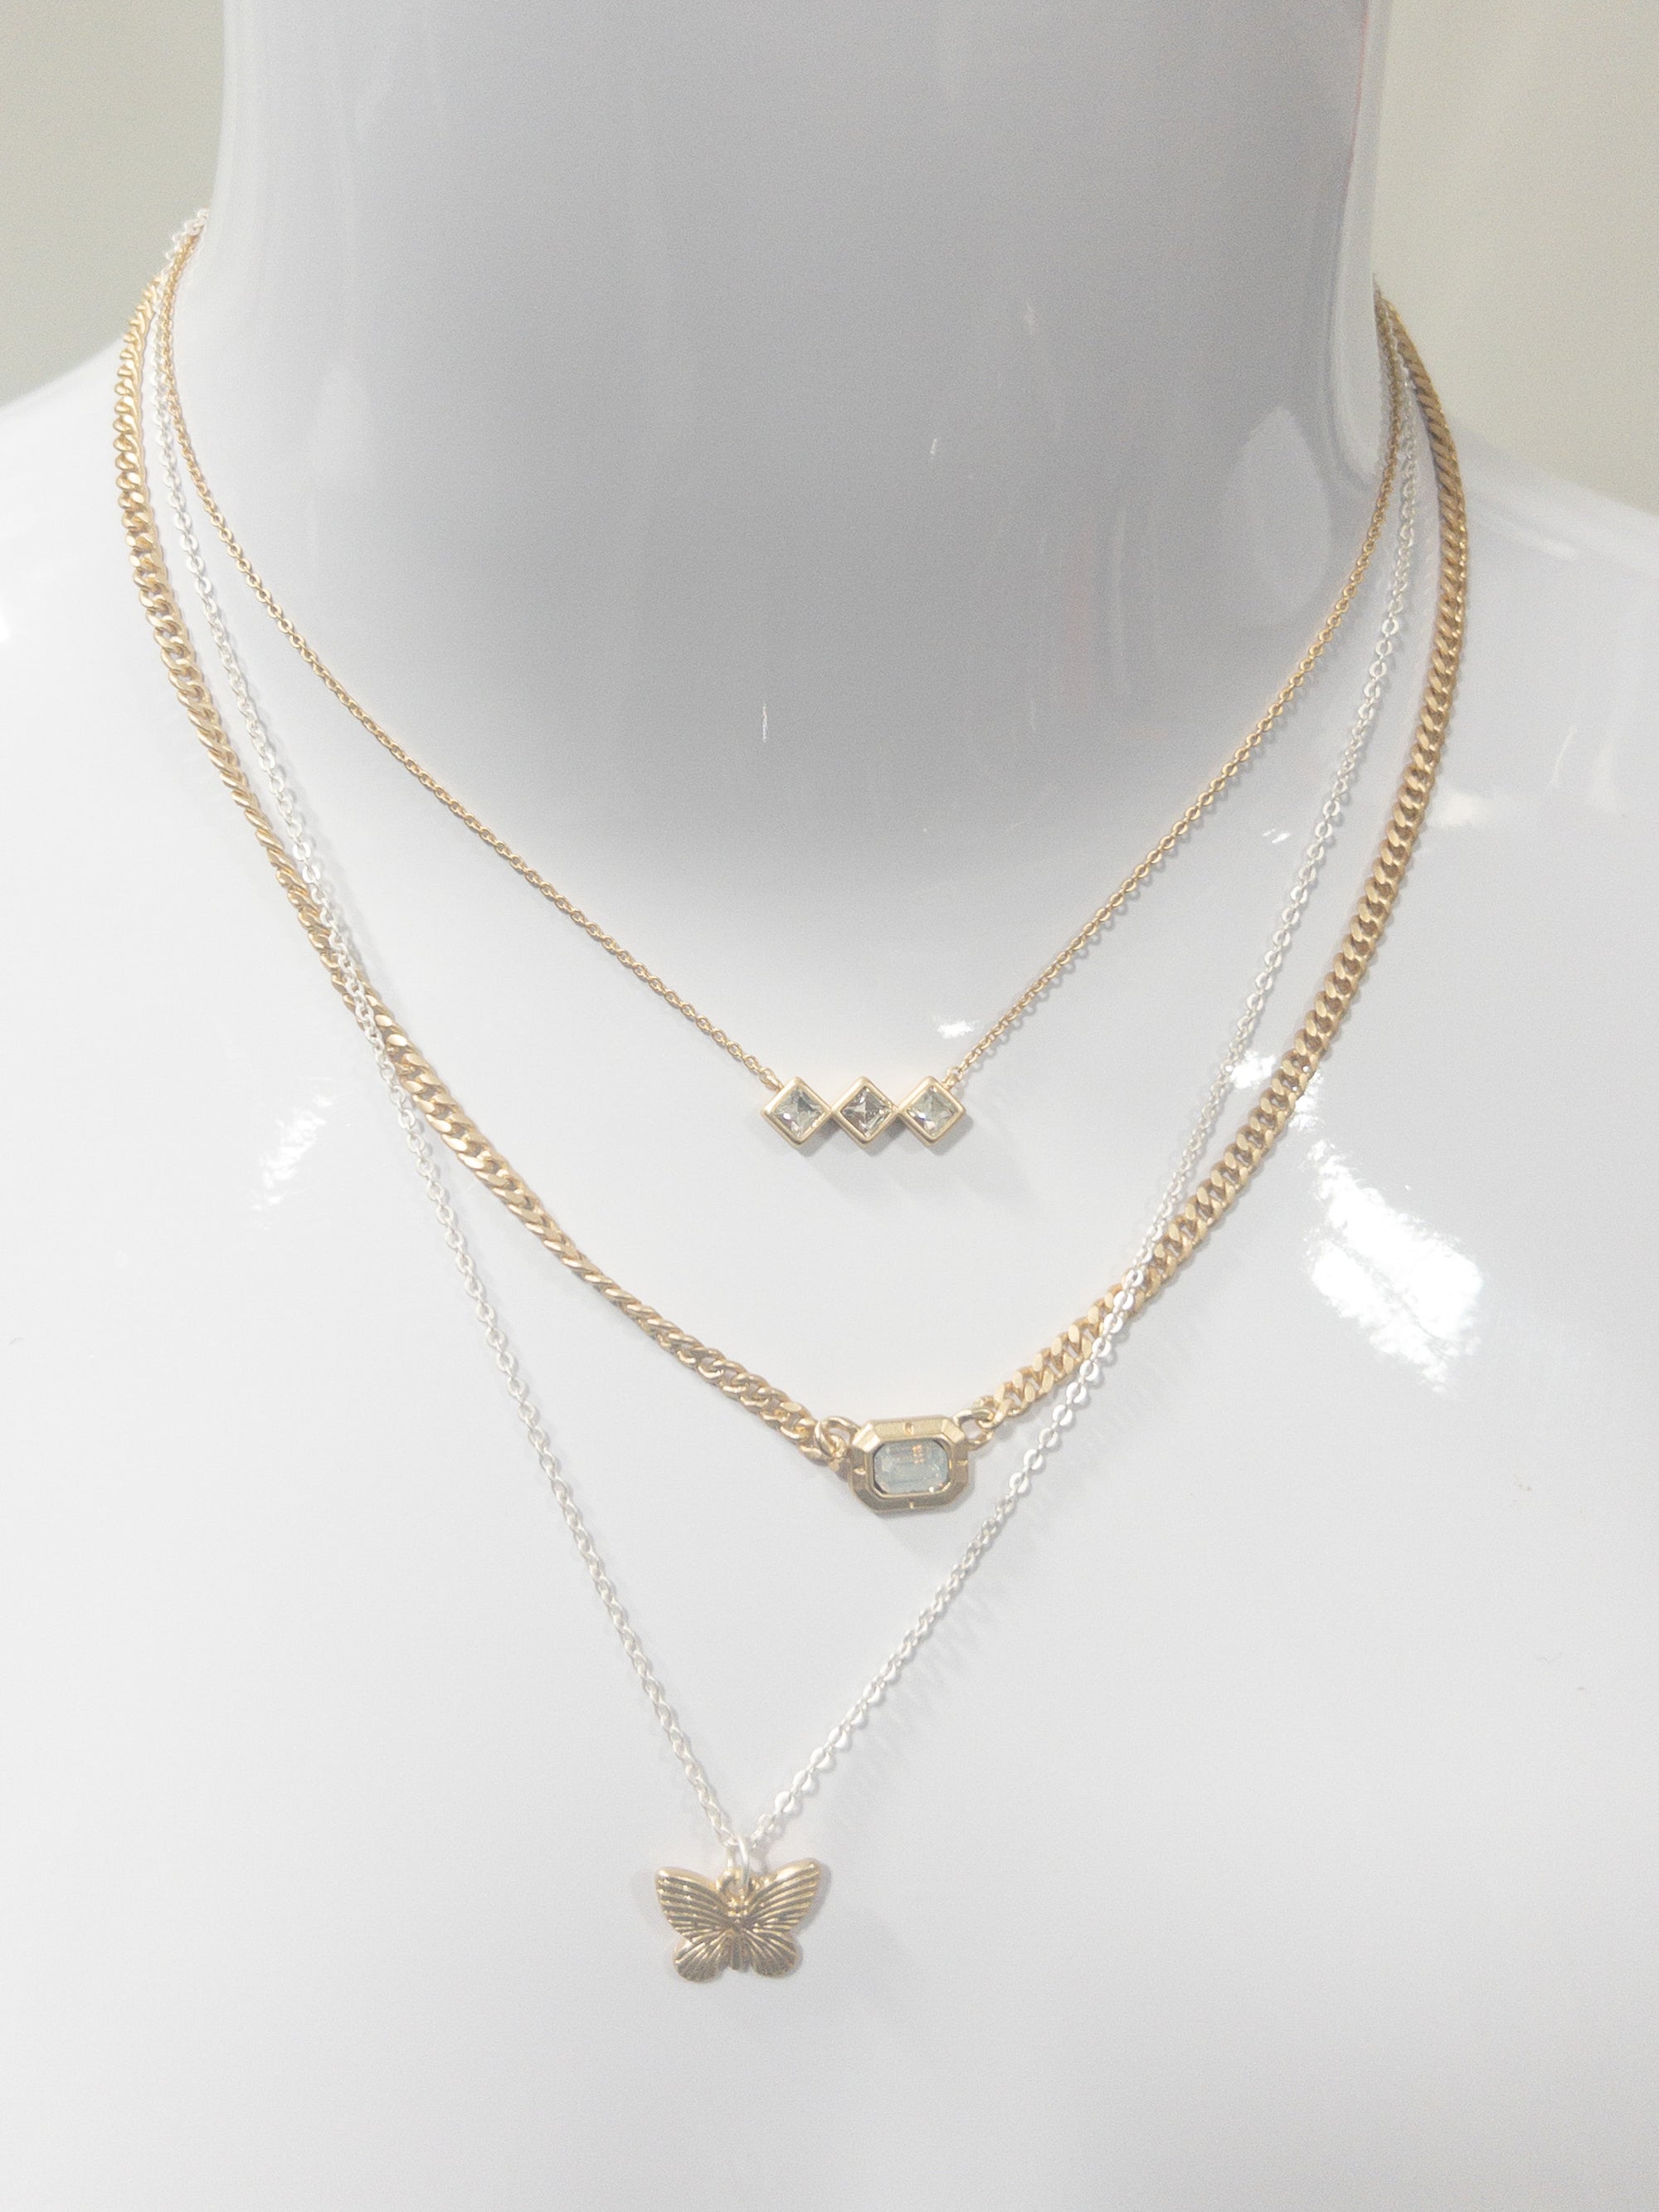 3 STRAND, DIAMOND CRYSTAL BAR, MOONSTONE CRYSTAL GOLD EMERALD PLATE, GOLD BUTTERFLY NECKLACE